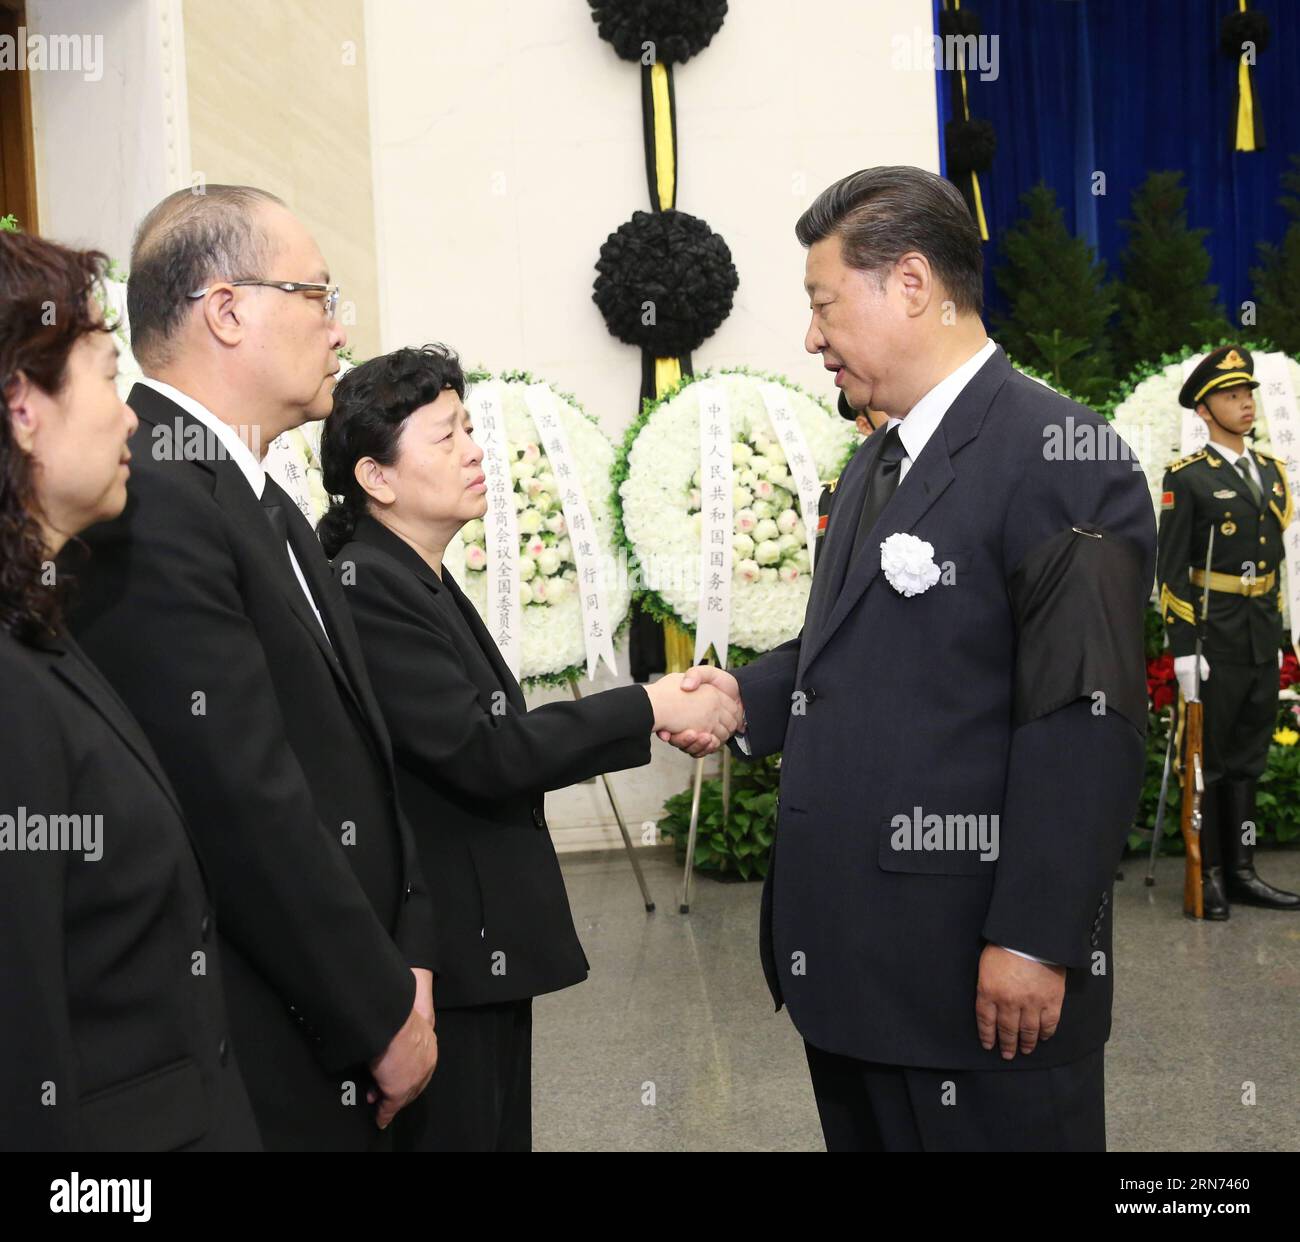 (150816) -- BEIJING, Aug. 16, 2015 -- Chinese President Xi Jinping (R, front) shakes hands with a family member of Wei Jianxing, former head of China s top anti-graft body the Central Commission for Discipline Inspection of the Communist Party of China, during Wei s funeral at Babaoshan Revolutionary Cemetery in Beijing, capital of China, Aug. 16, 2015. President Xi Jinping, Premier Li Keqiang and senior leaders Zhang Dejiang, Yu Zhengsheng, Liu Yunshan, Wang Qishan and Zhang Gaoli, as well as former president Hu Jintao attended the funeral on Friday morning. Former president Jiang Zemin, who Stock Photo